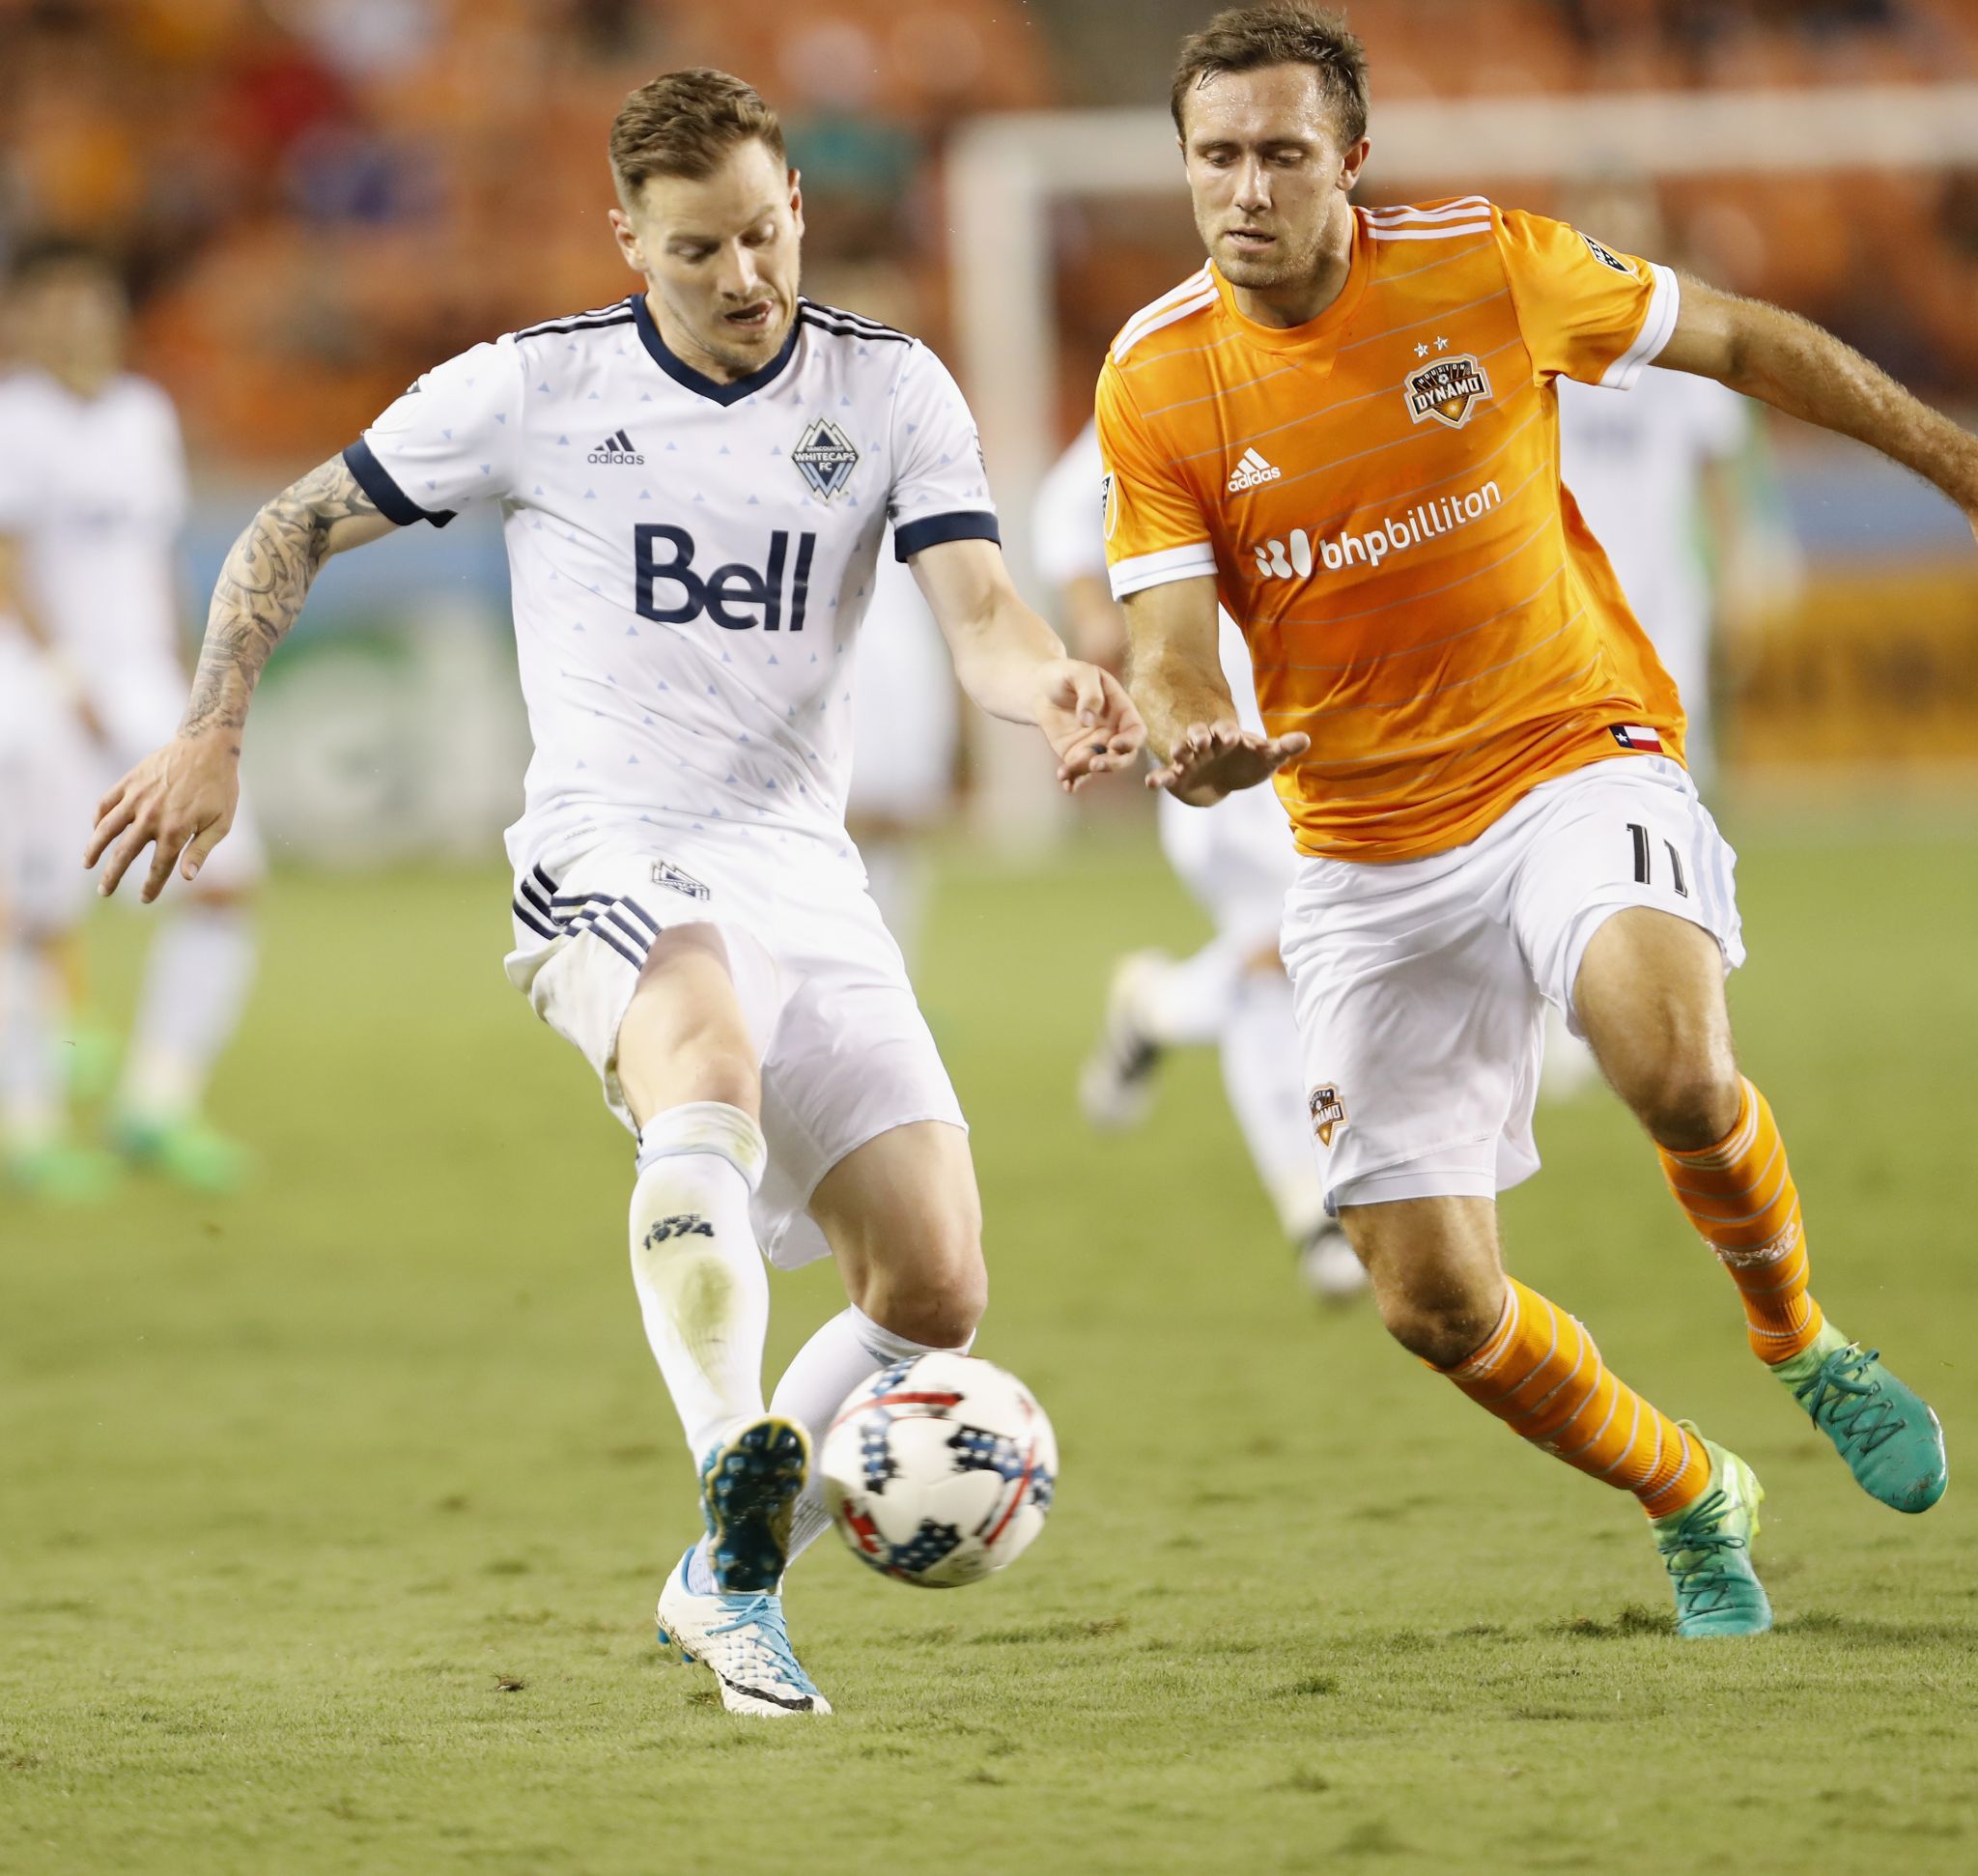 Dynamo call in reinforcements for U.S. Open Cup game